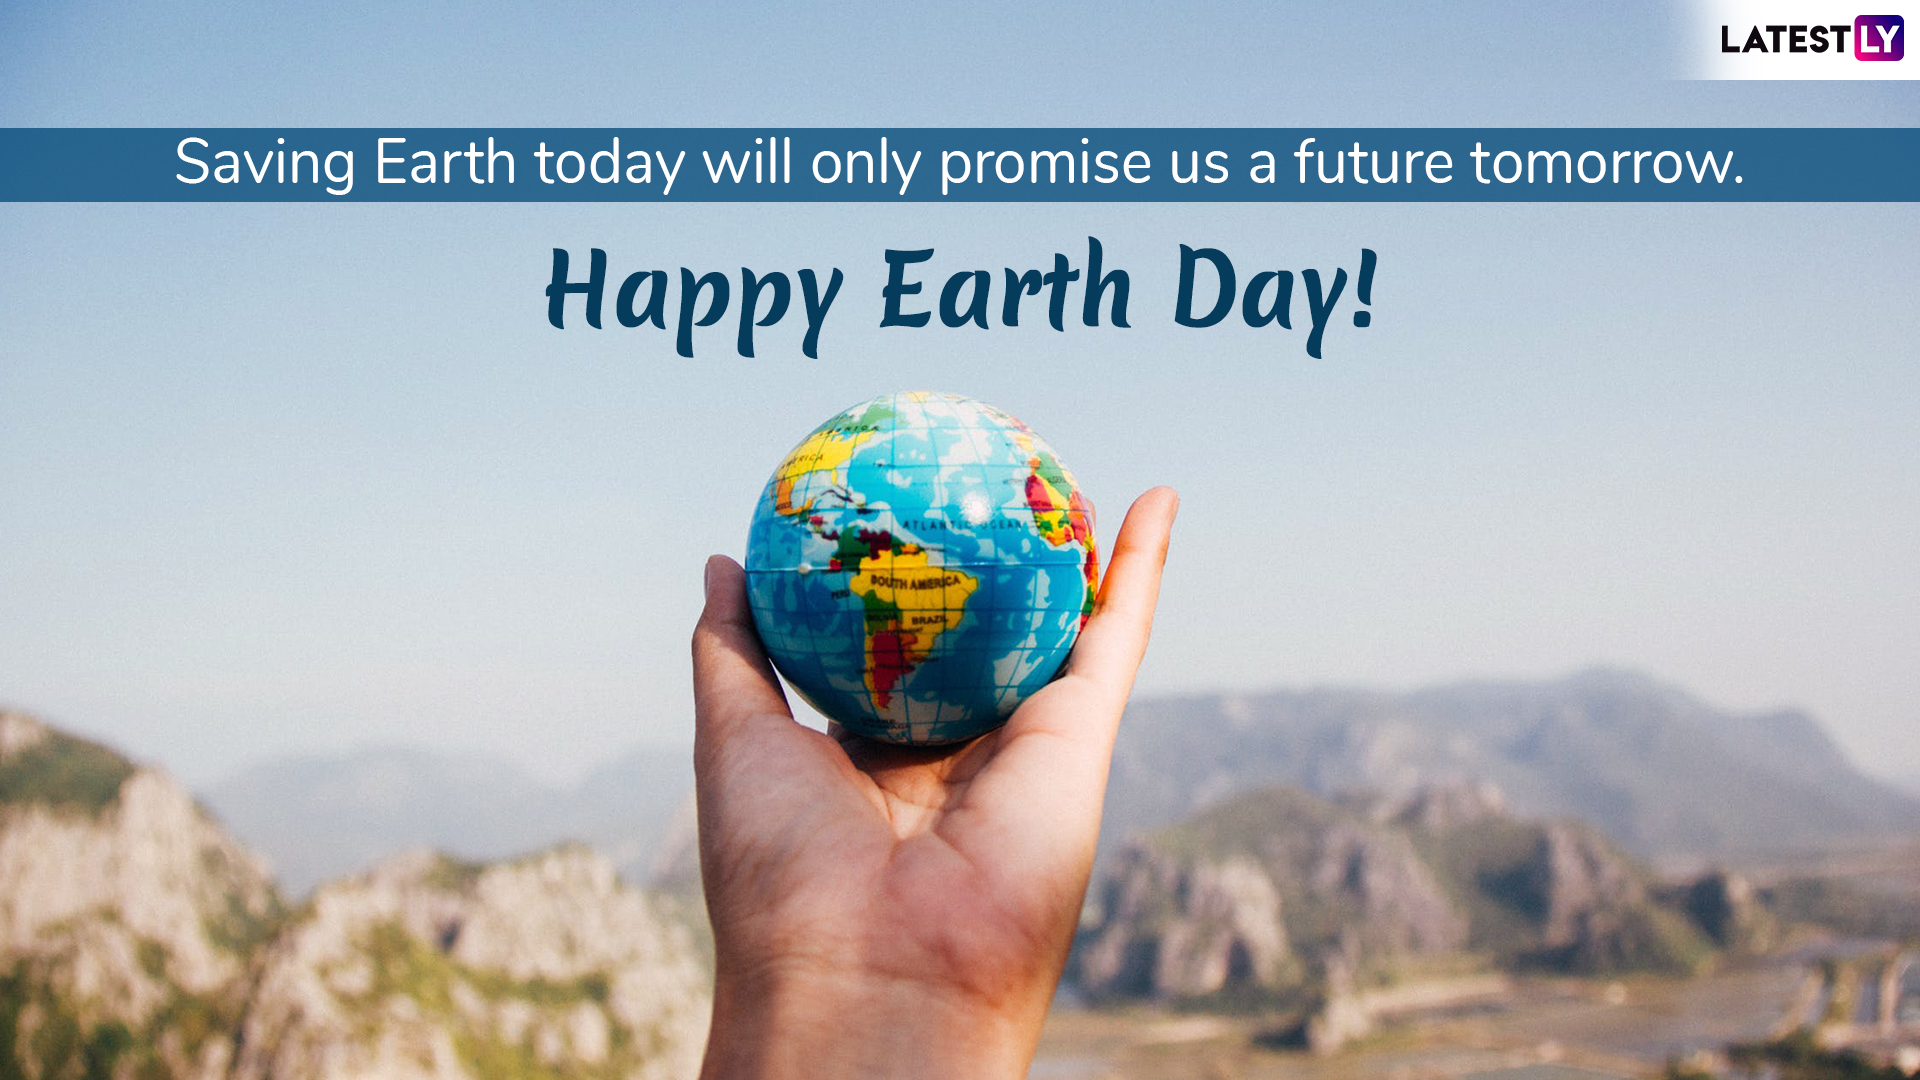 Earth Day 2019 Greetings: Send These Beautiful Quotes, GIF Images, WhatsApp Stickers and Photos ...